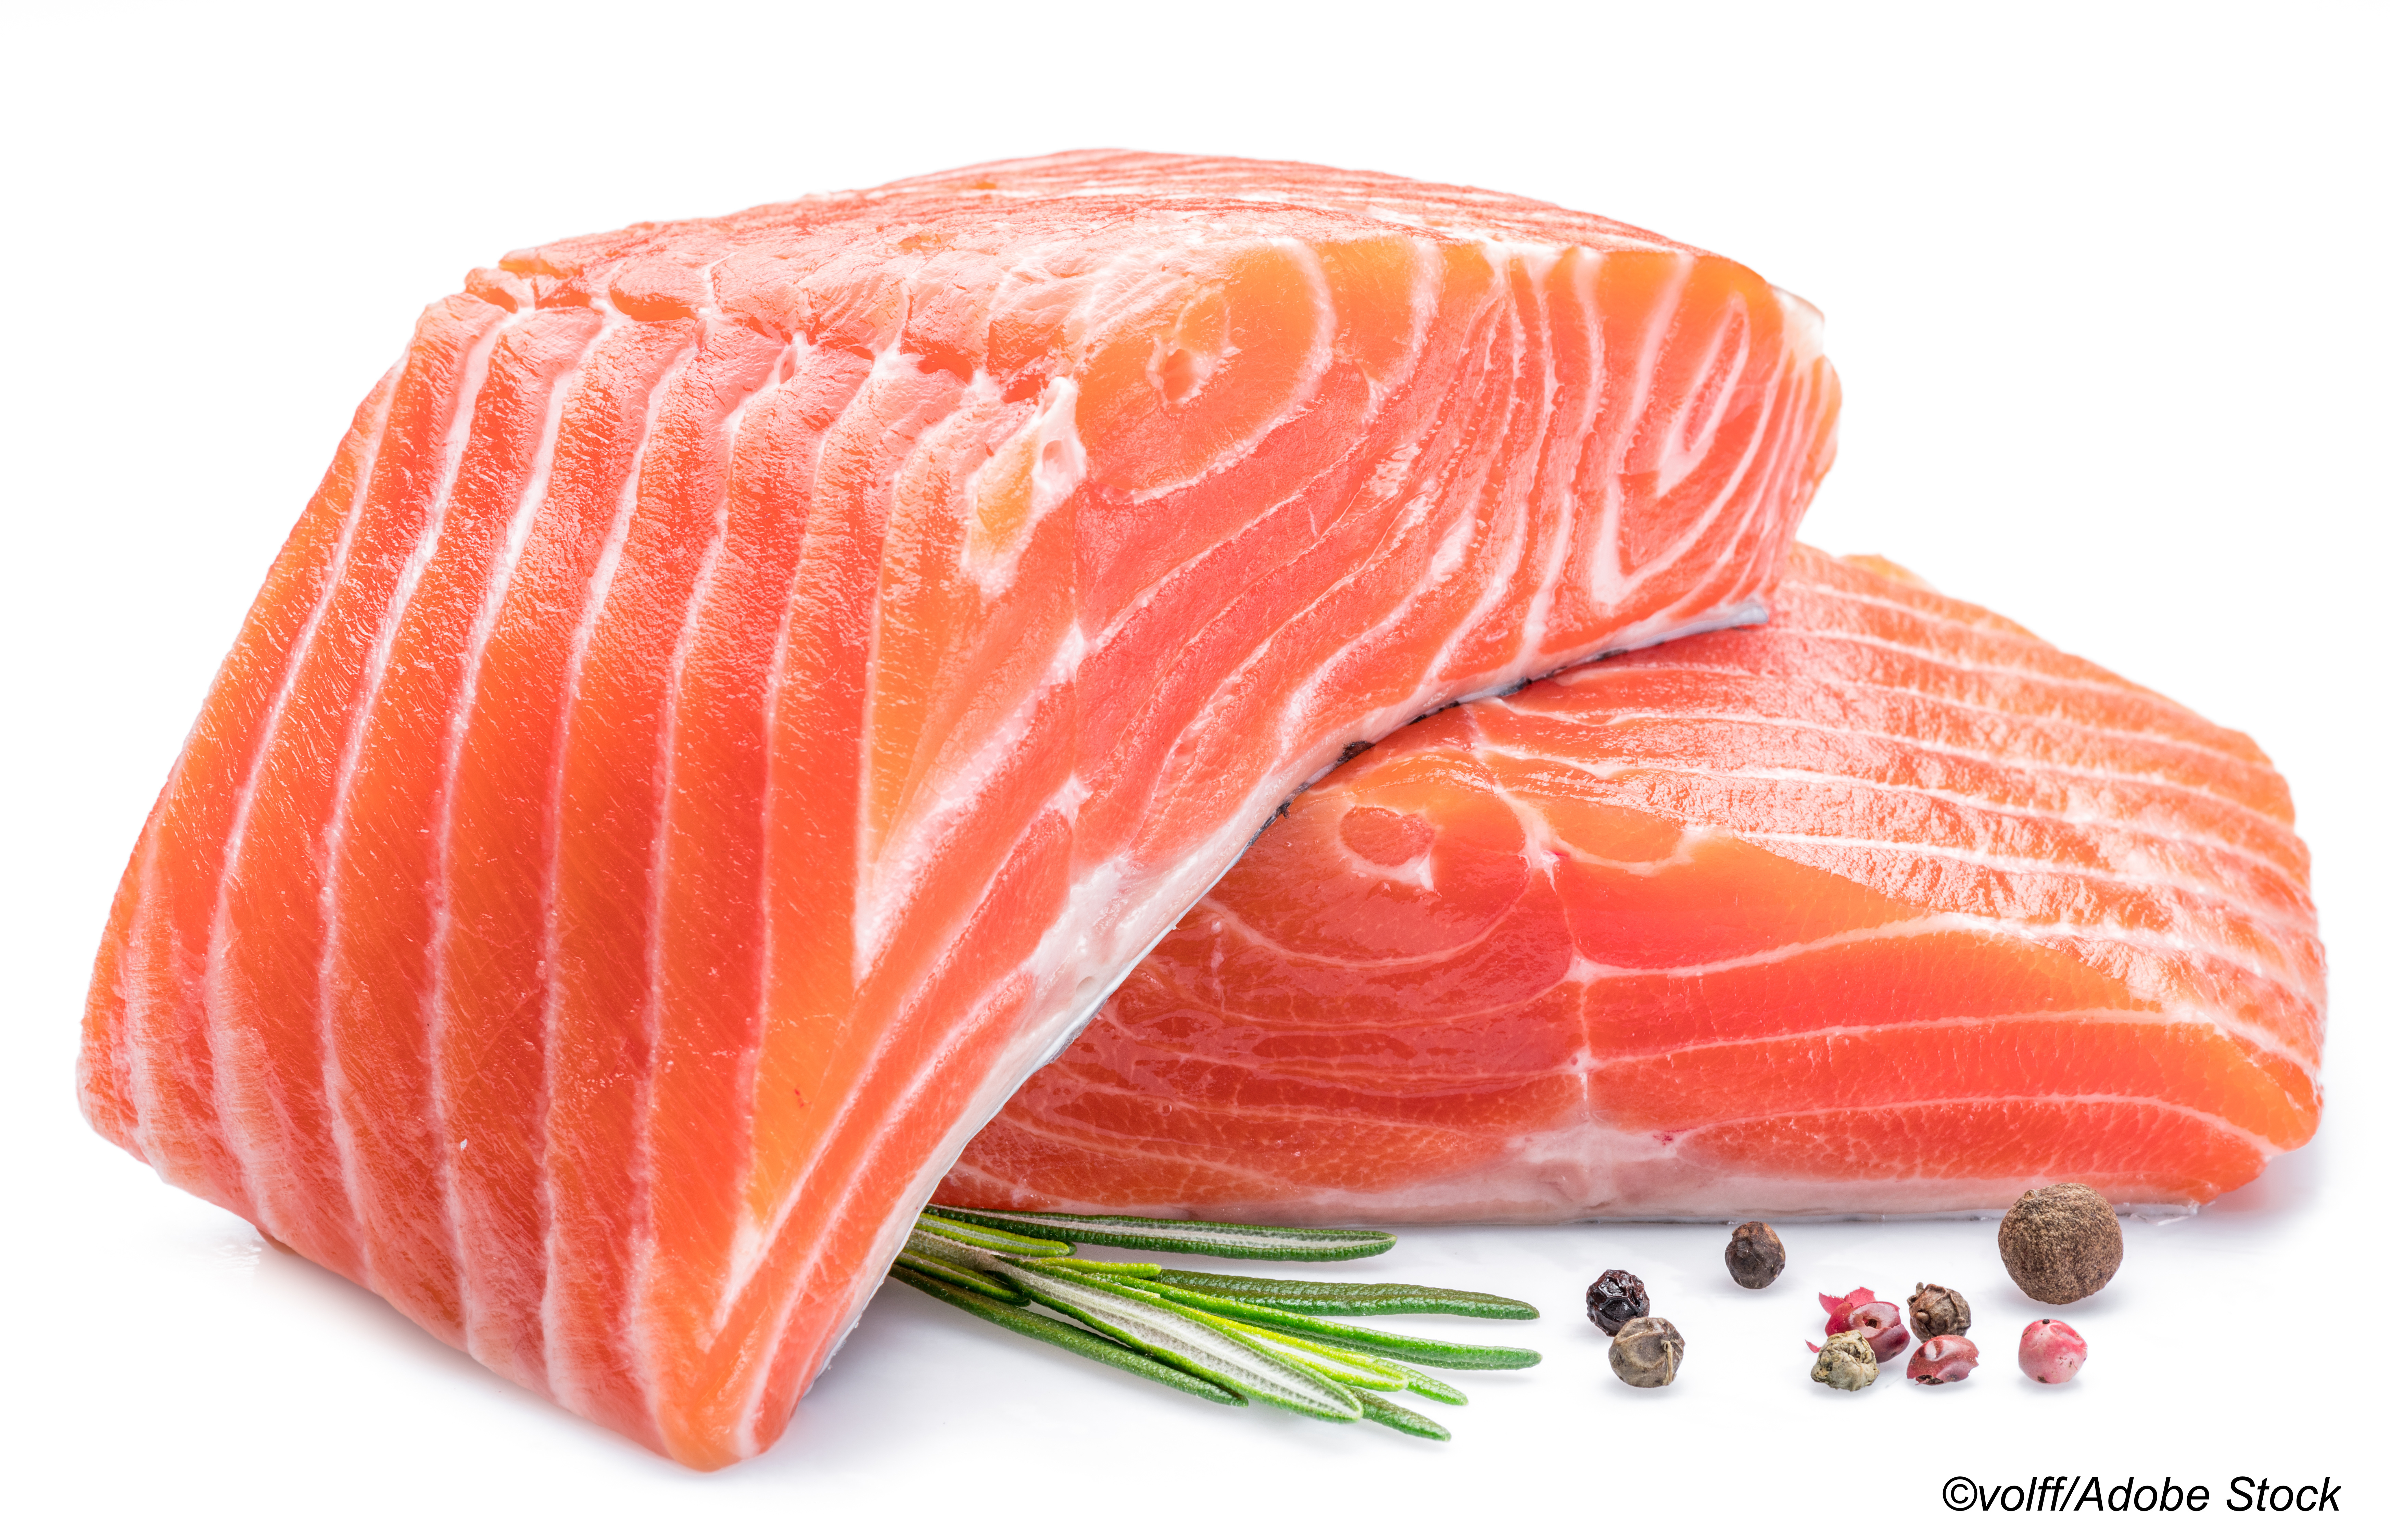 Omega-3 Fatty Acids: What Is the Optimal Dose for Lowering BP? 